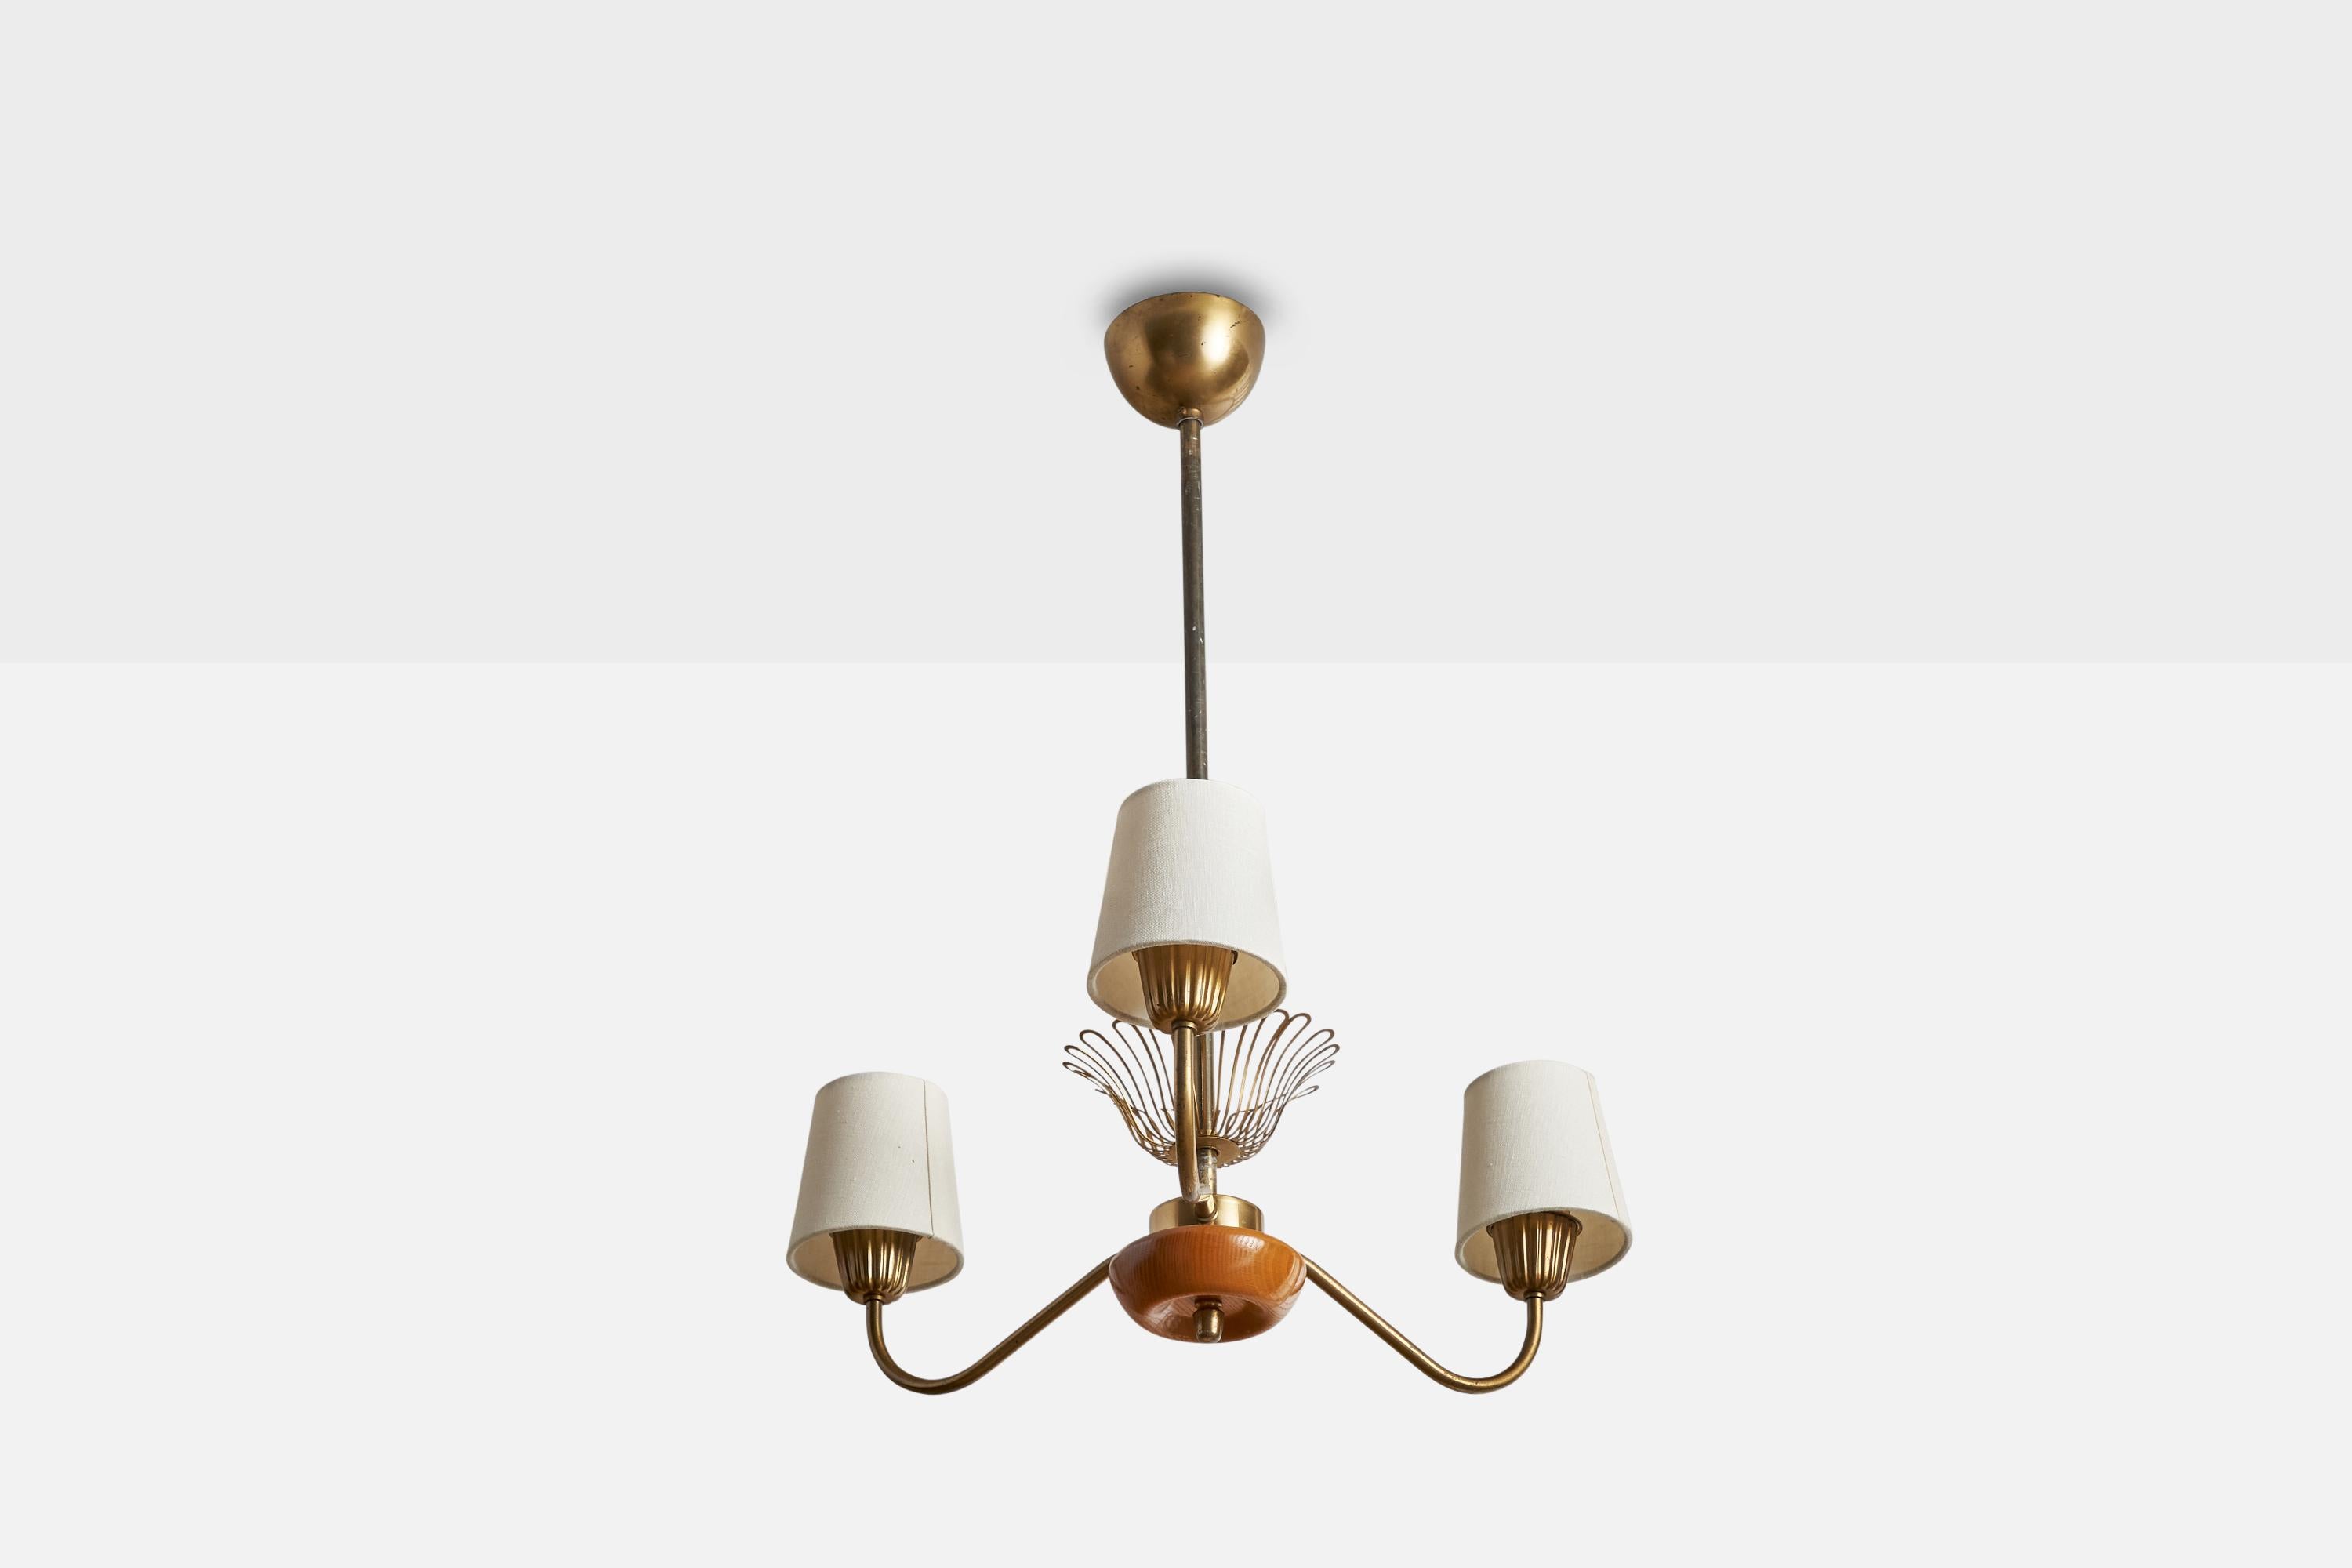 A brass, oak and white fabric chandelier designed and produced in Sweden, 1940s.

Dimensions of canopy (inches): 2.5” H x 4” Diameter
Socket takes standard E-26 bulbs. 3 sockets.There is no maximum wattage stated on the fixture. All lighting will be